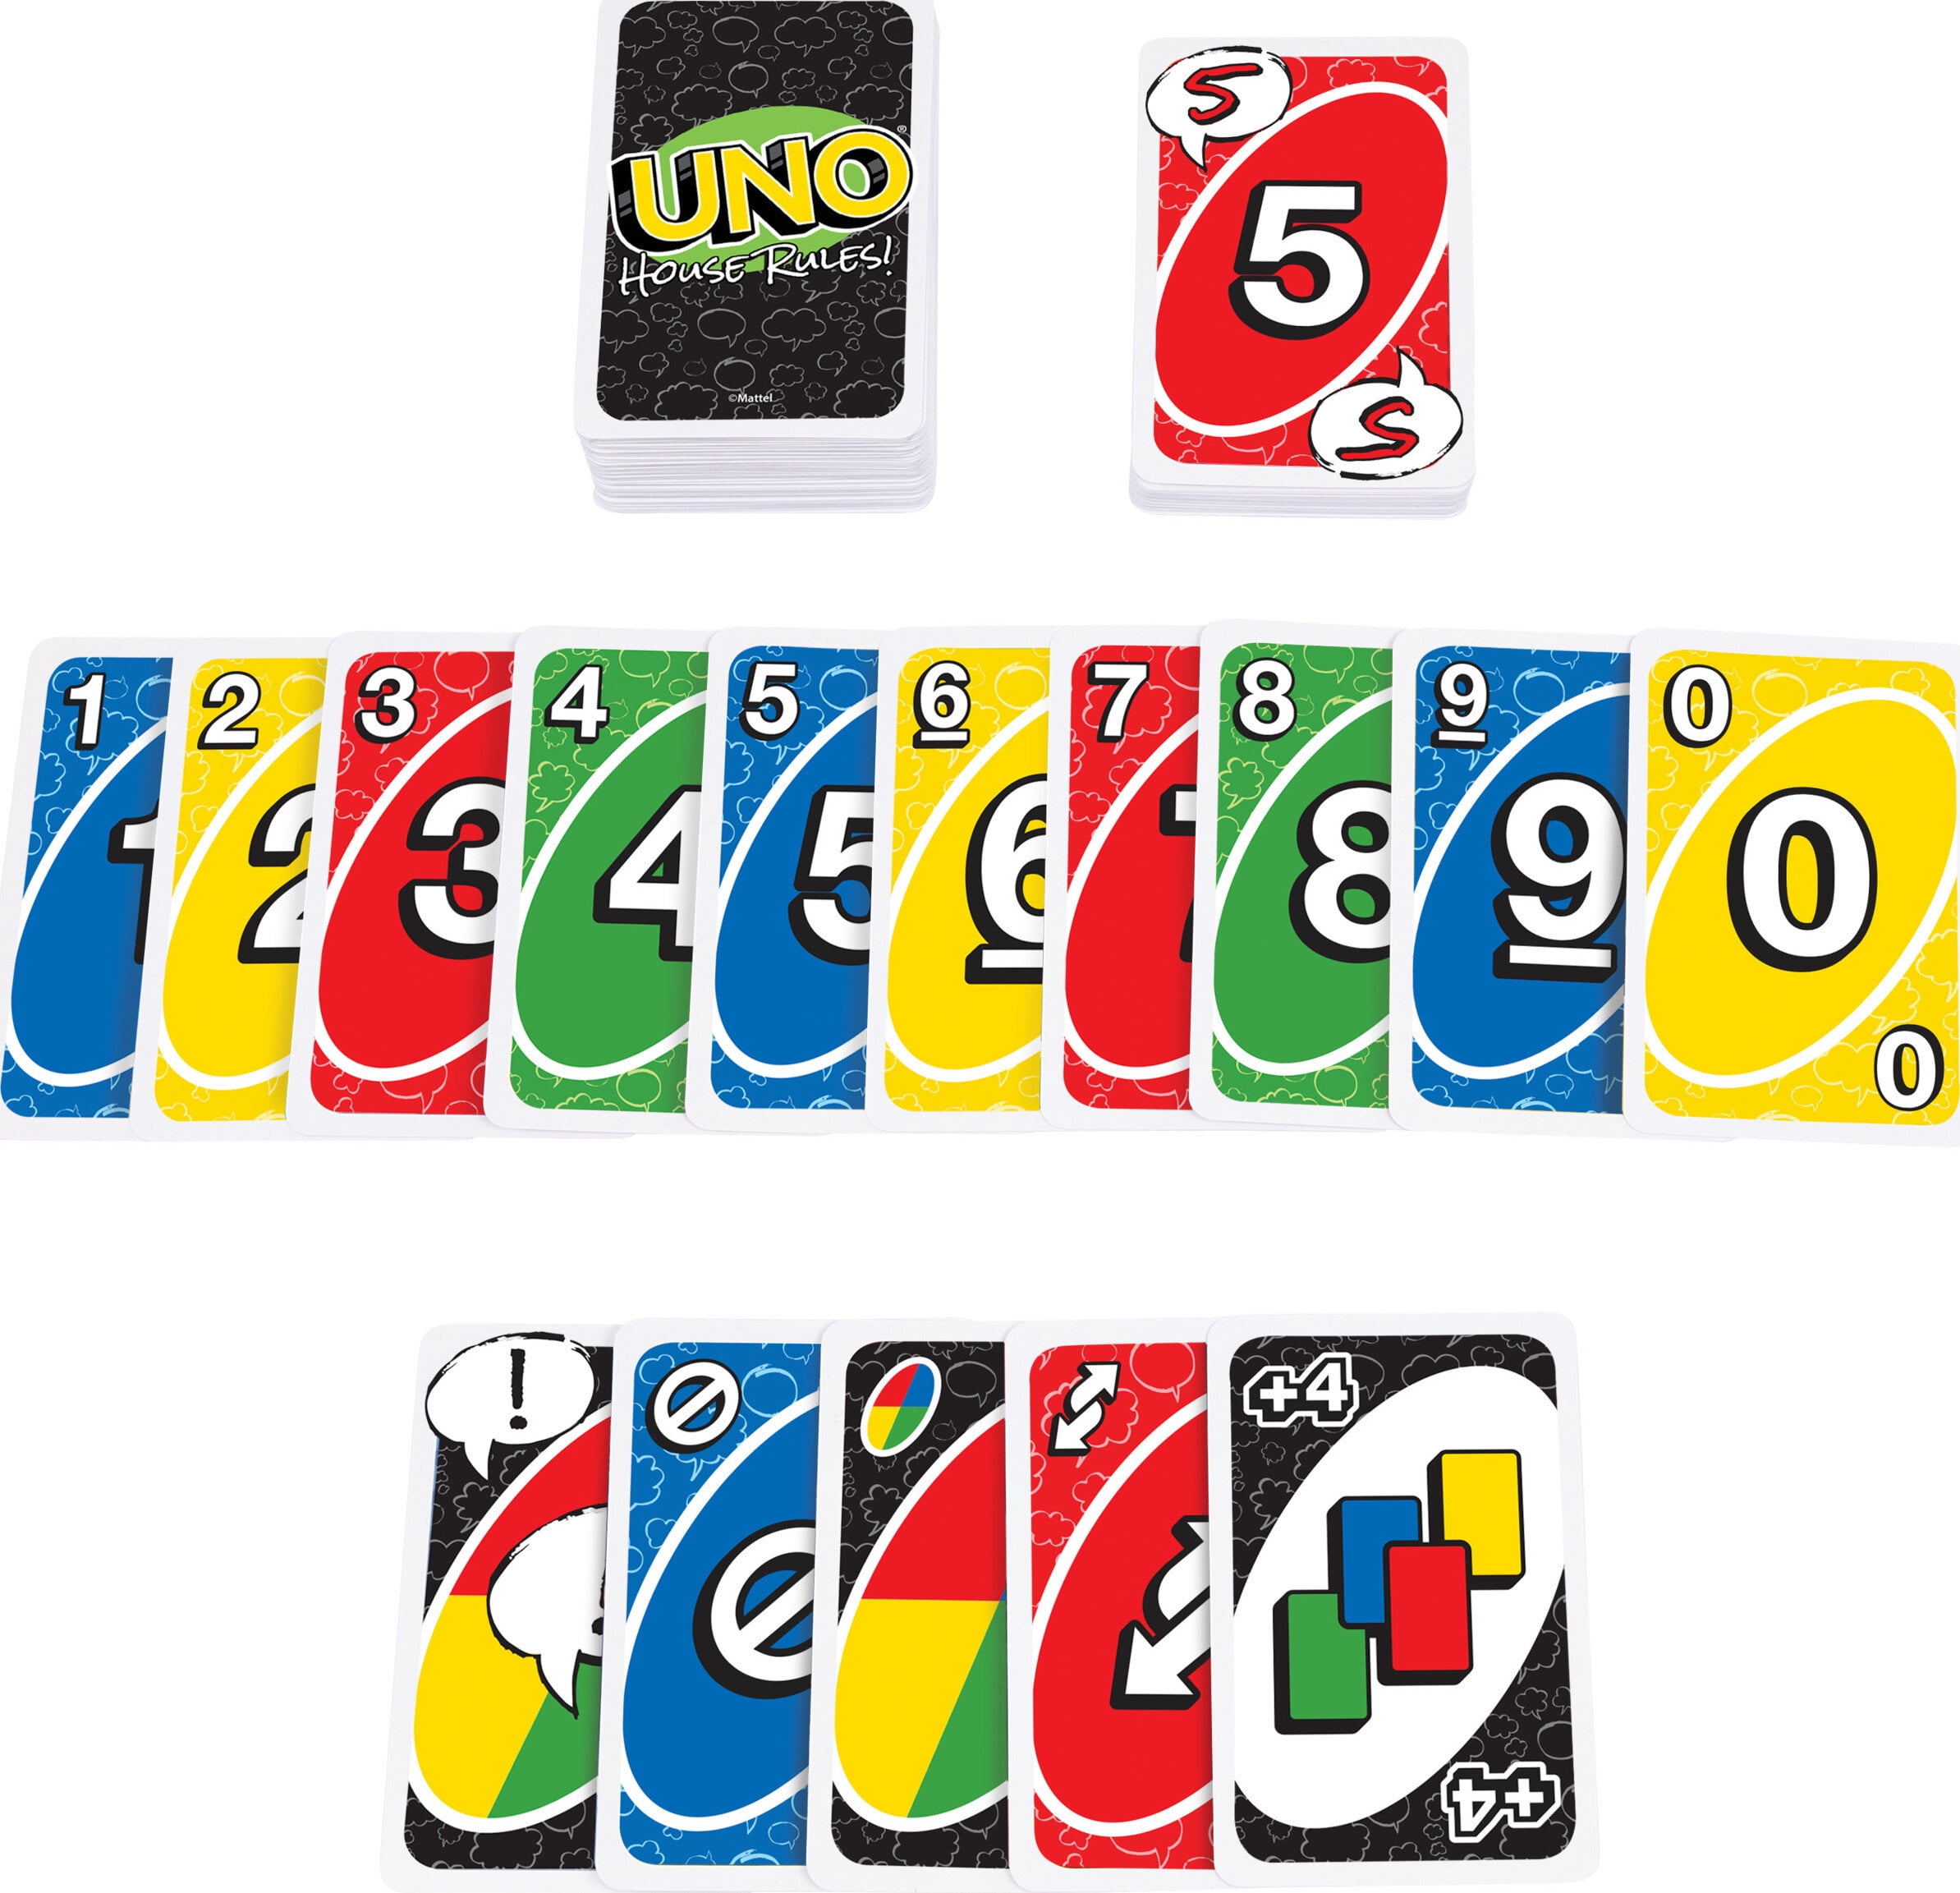 UNO! Mobile Game - What kind of CRAZY house rules does your family use on  Wild Weekends? 🤣